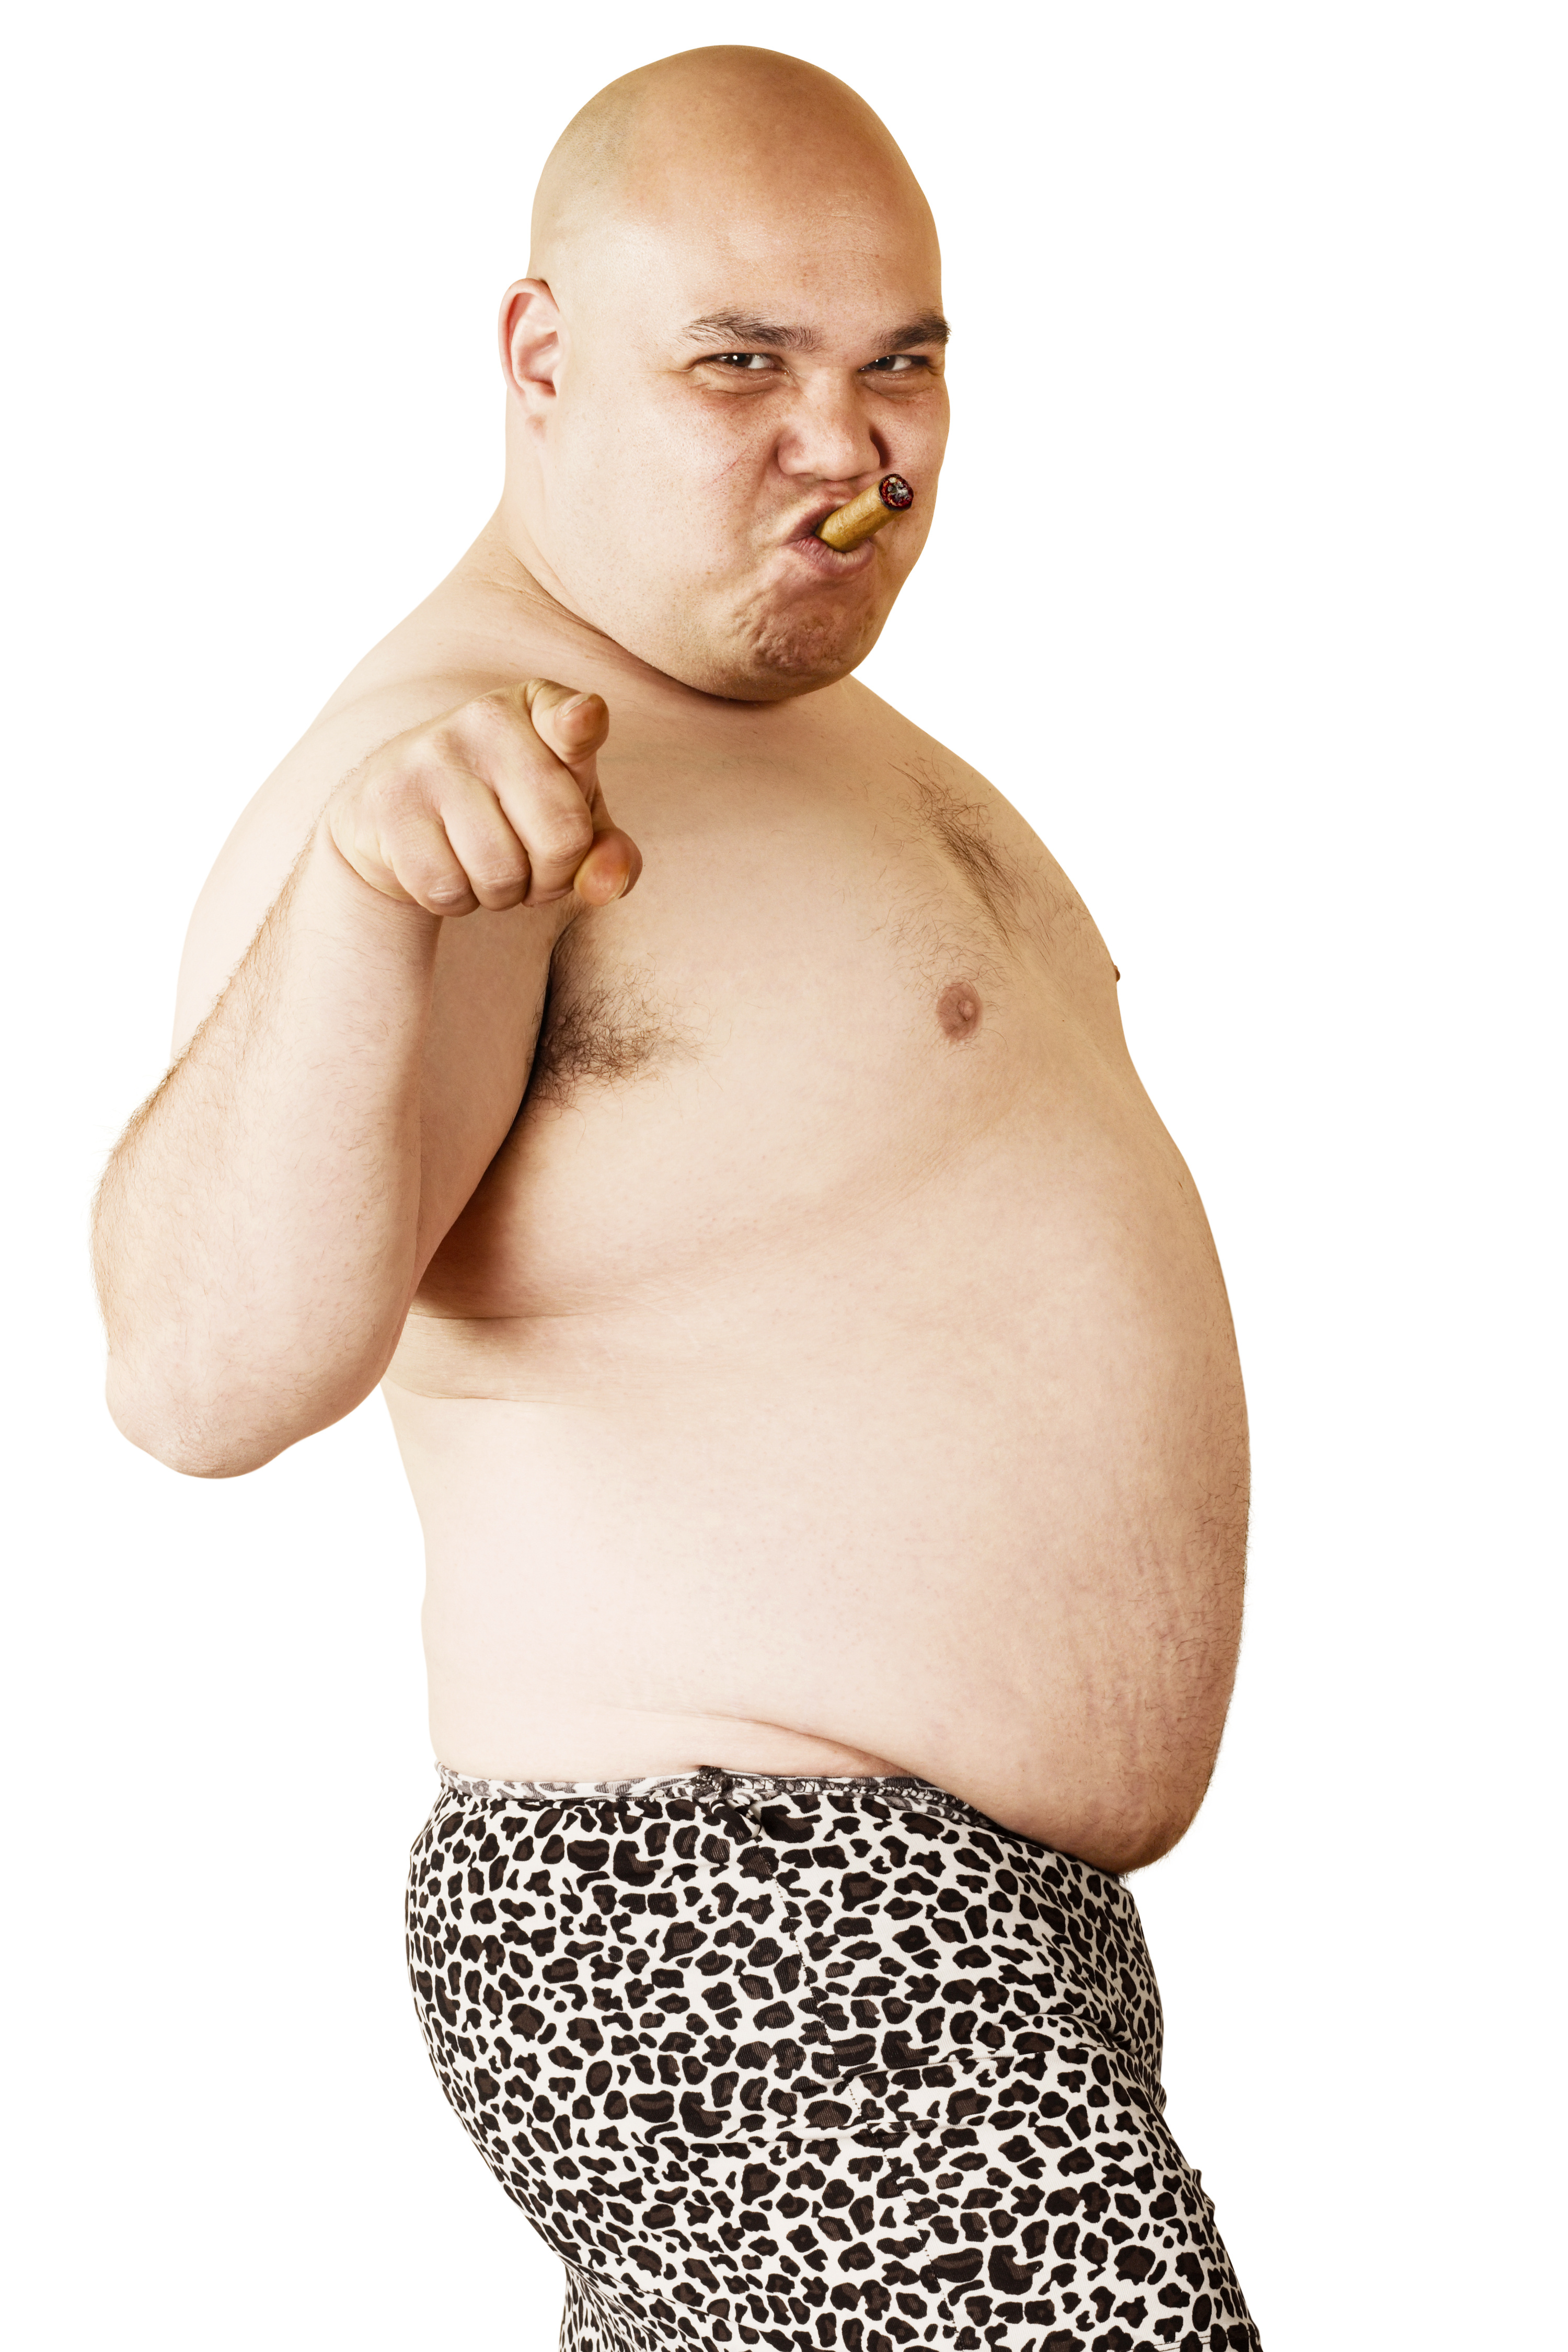 A cigar-smoking slightly overweight bald male wearing an animal-print skirt and pointing at you.  So Sexy. Harsh lighting for more disturbing feel.